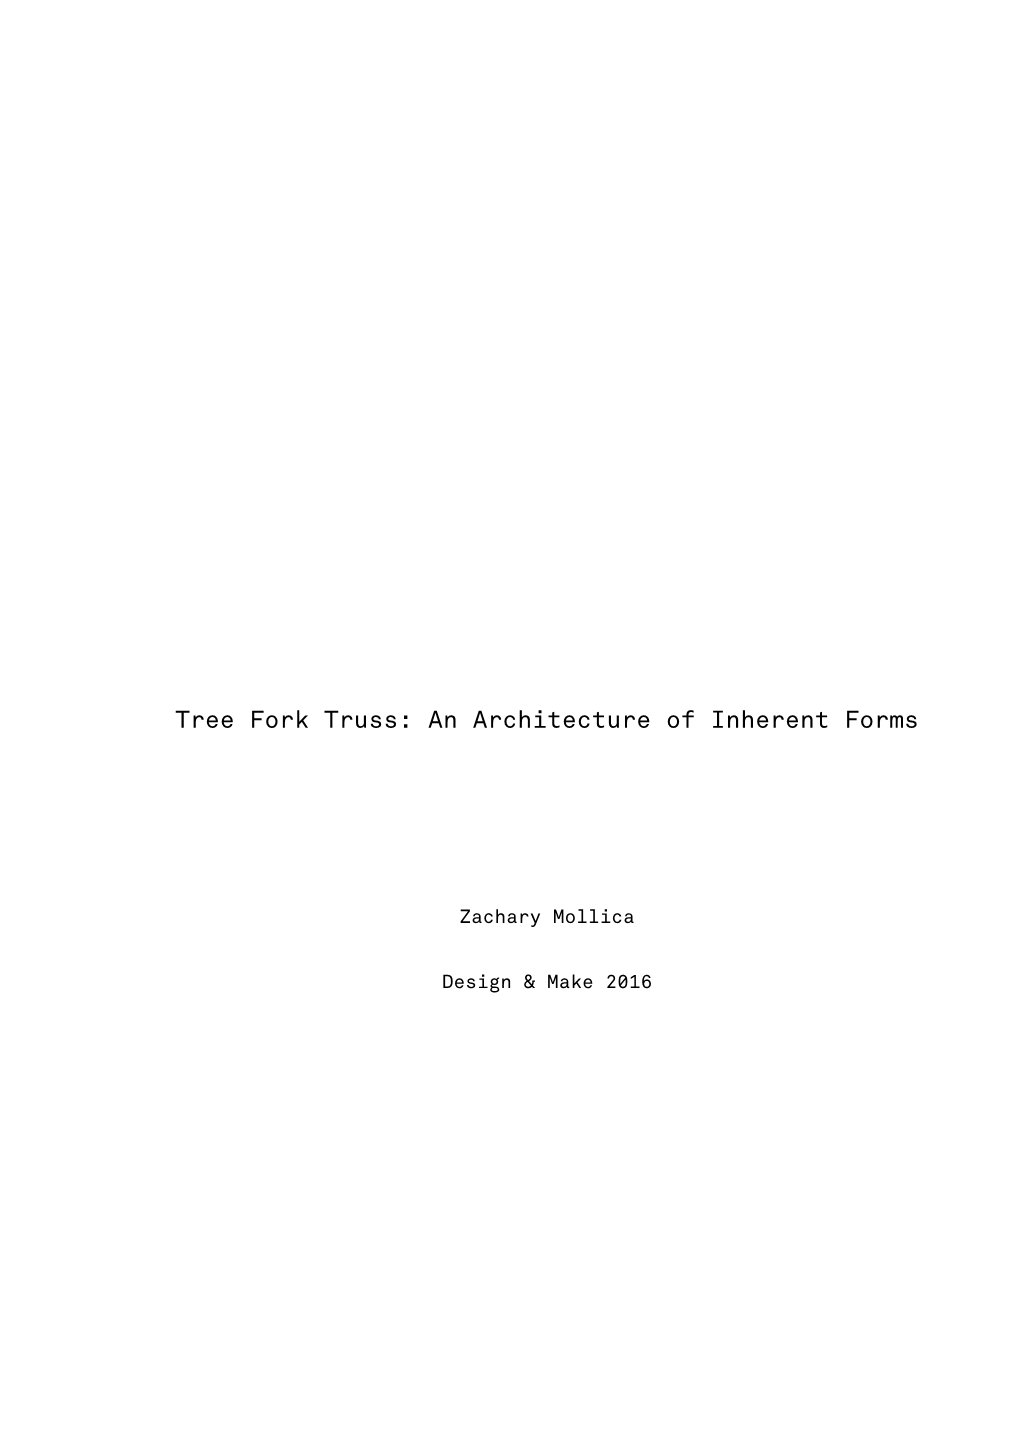 Tree Fork Truss: an Architecture of Inherent Forms